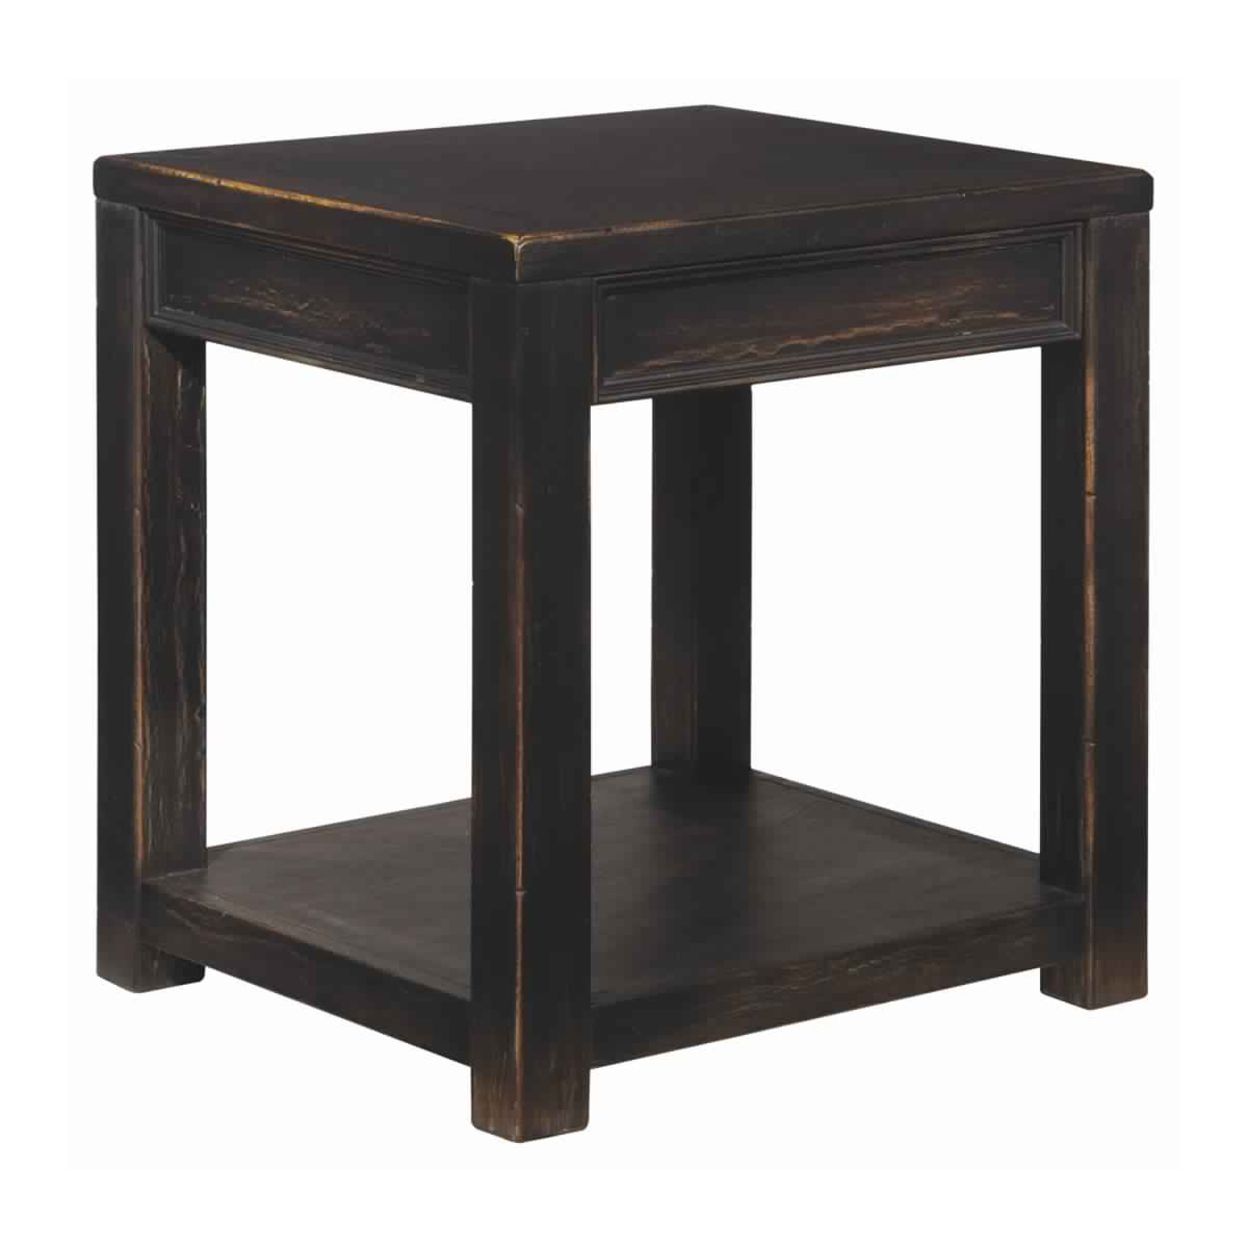 Square Shape Wooden End Table With Open Shelf, Black | Ebay Intended For Square Matte Black Console Tables (Photo 10 of 20)